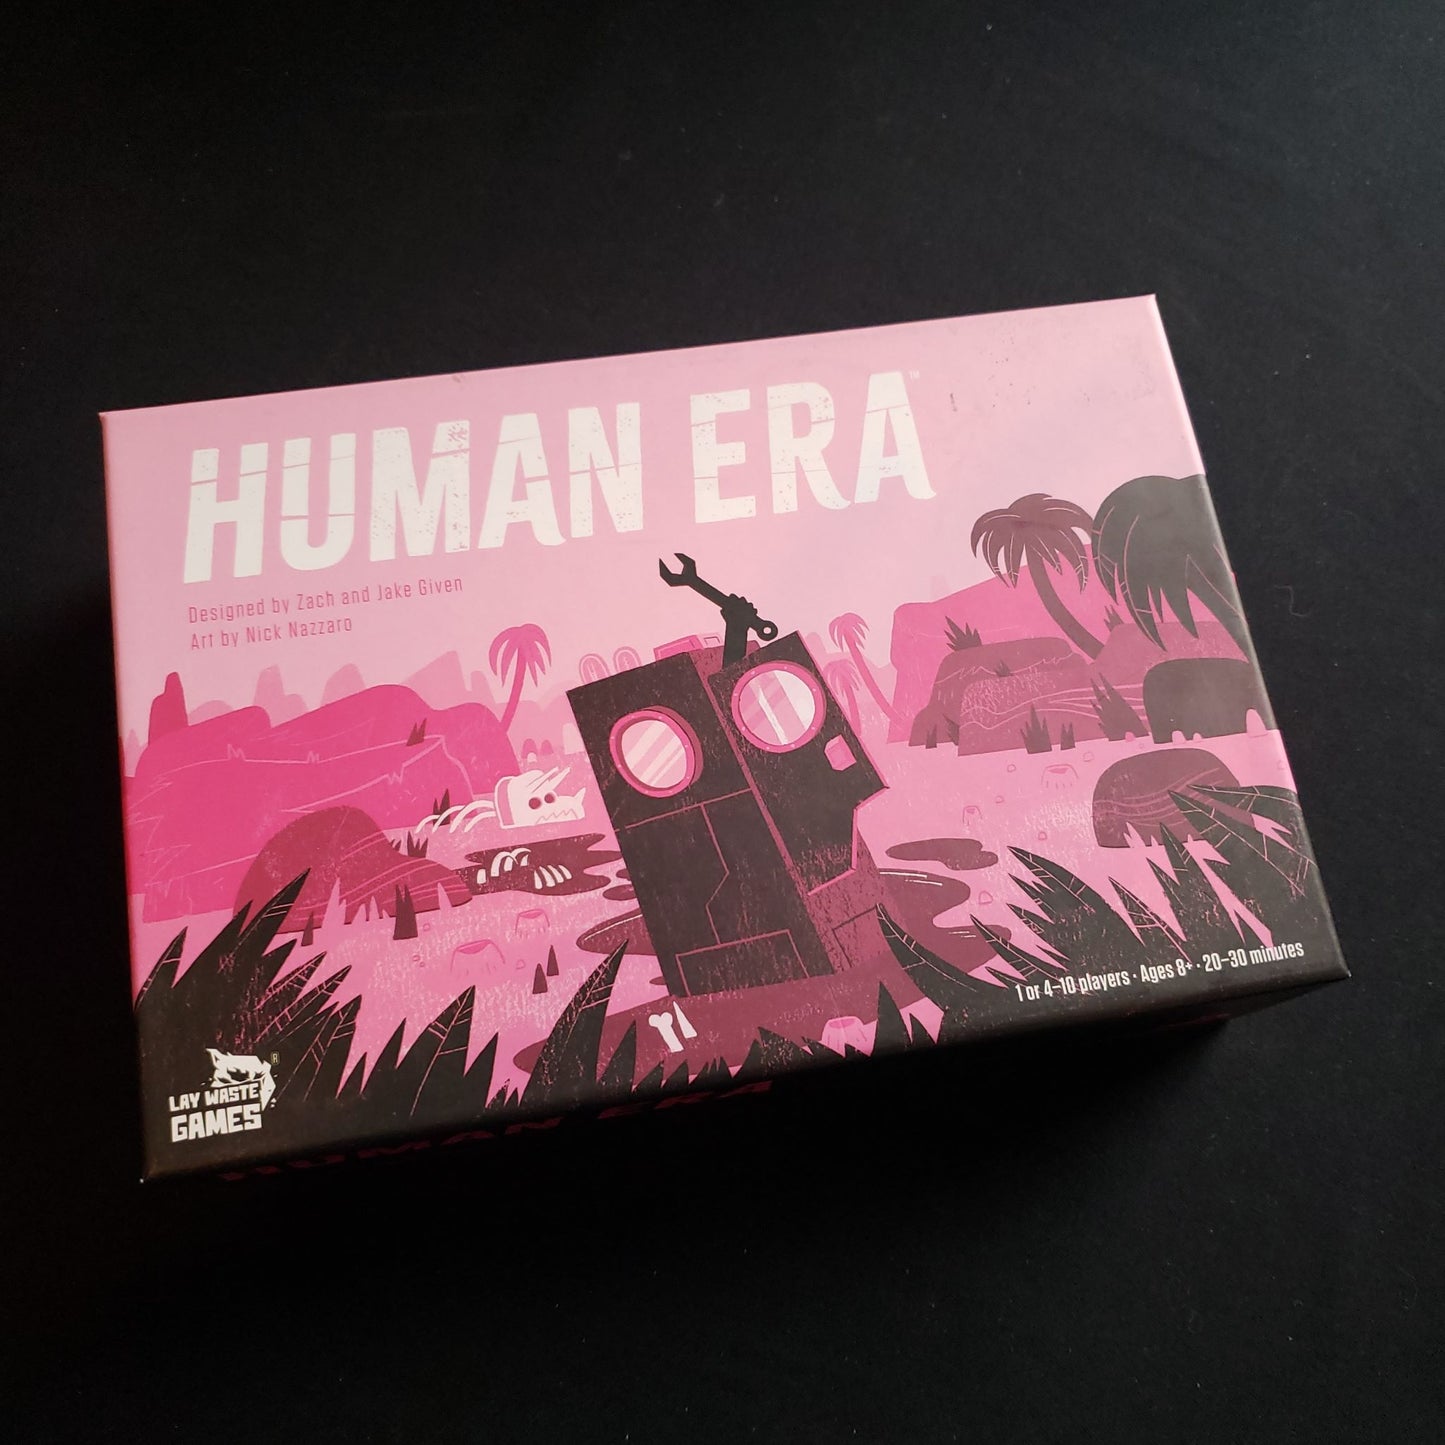 Image shows the front cover of the box of the Human Era board game